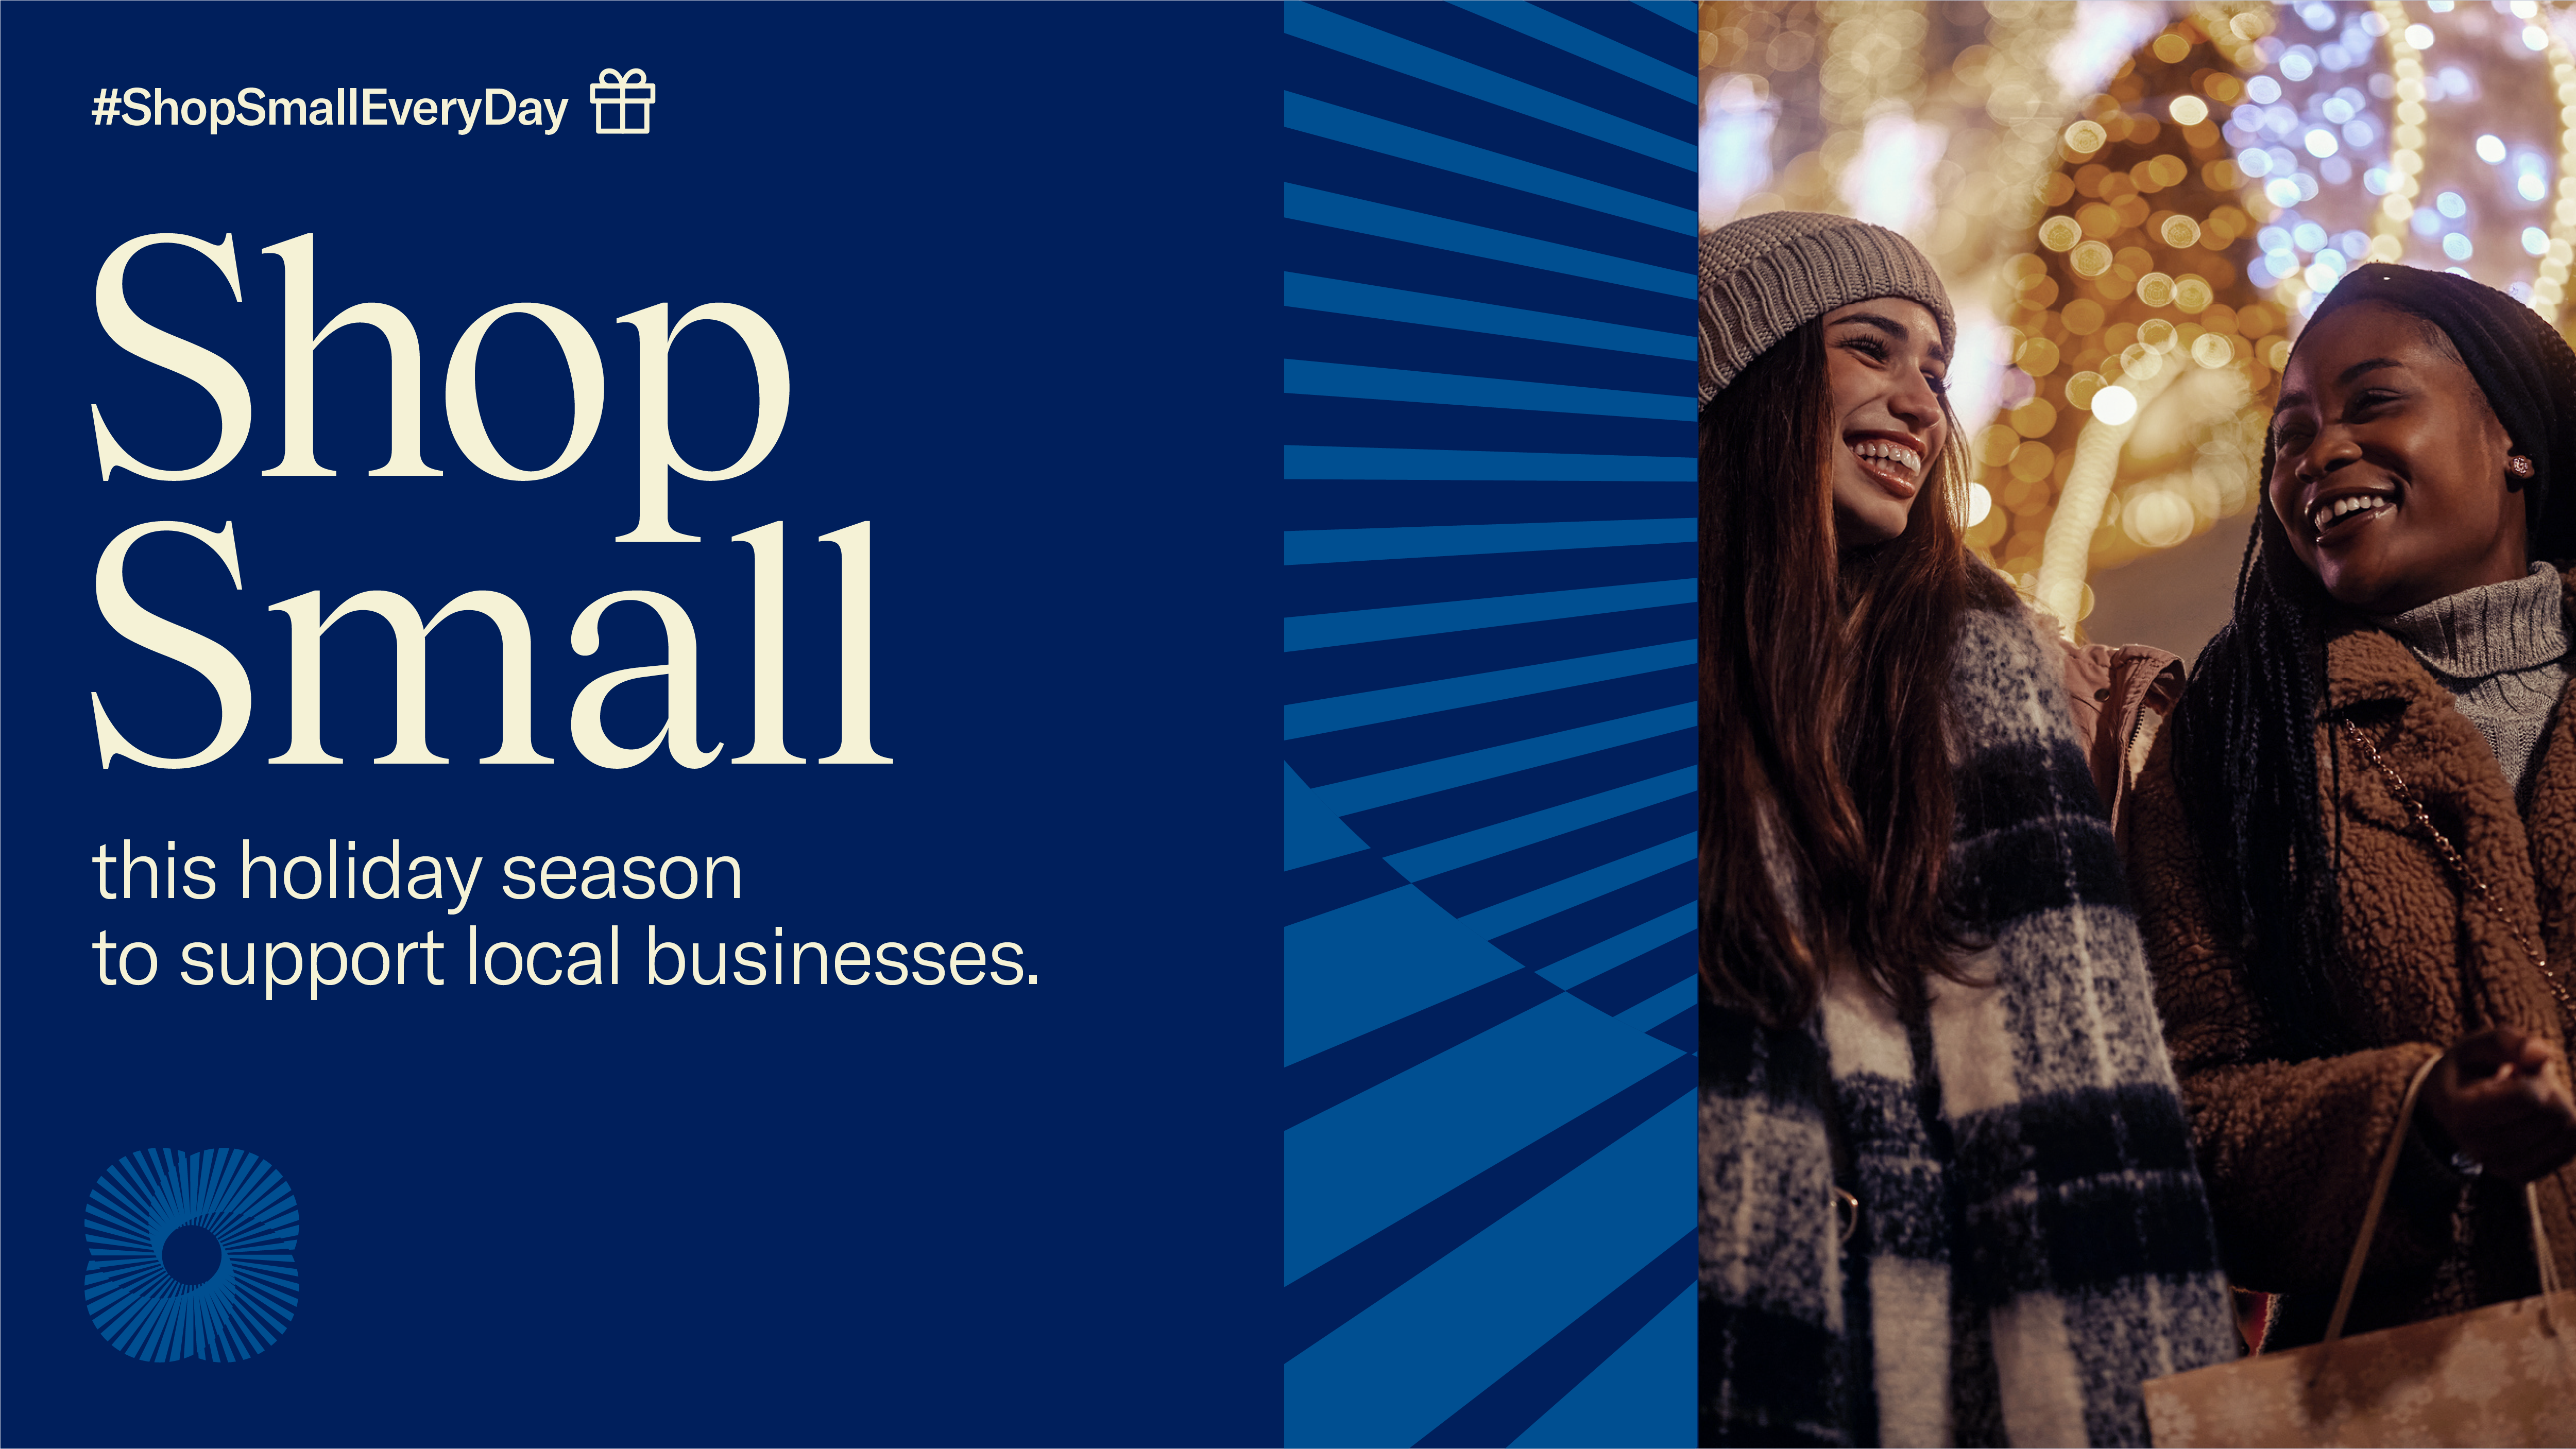 Small Business Saturday Resources for Small Business